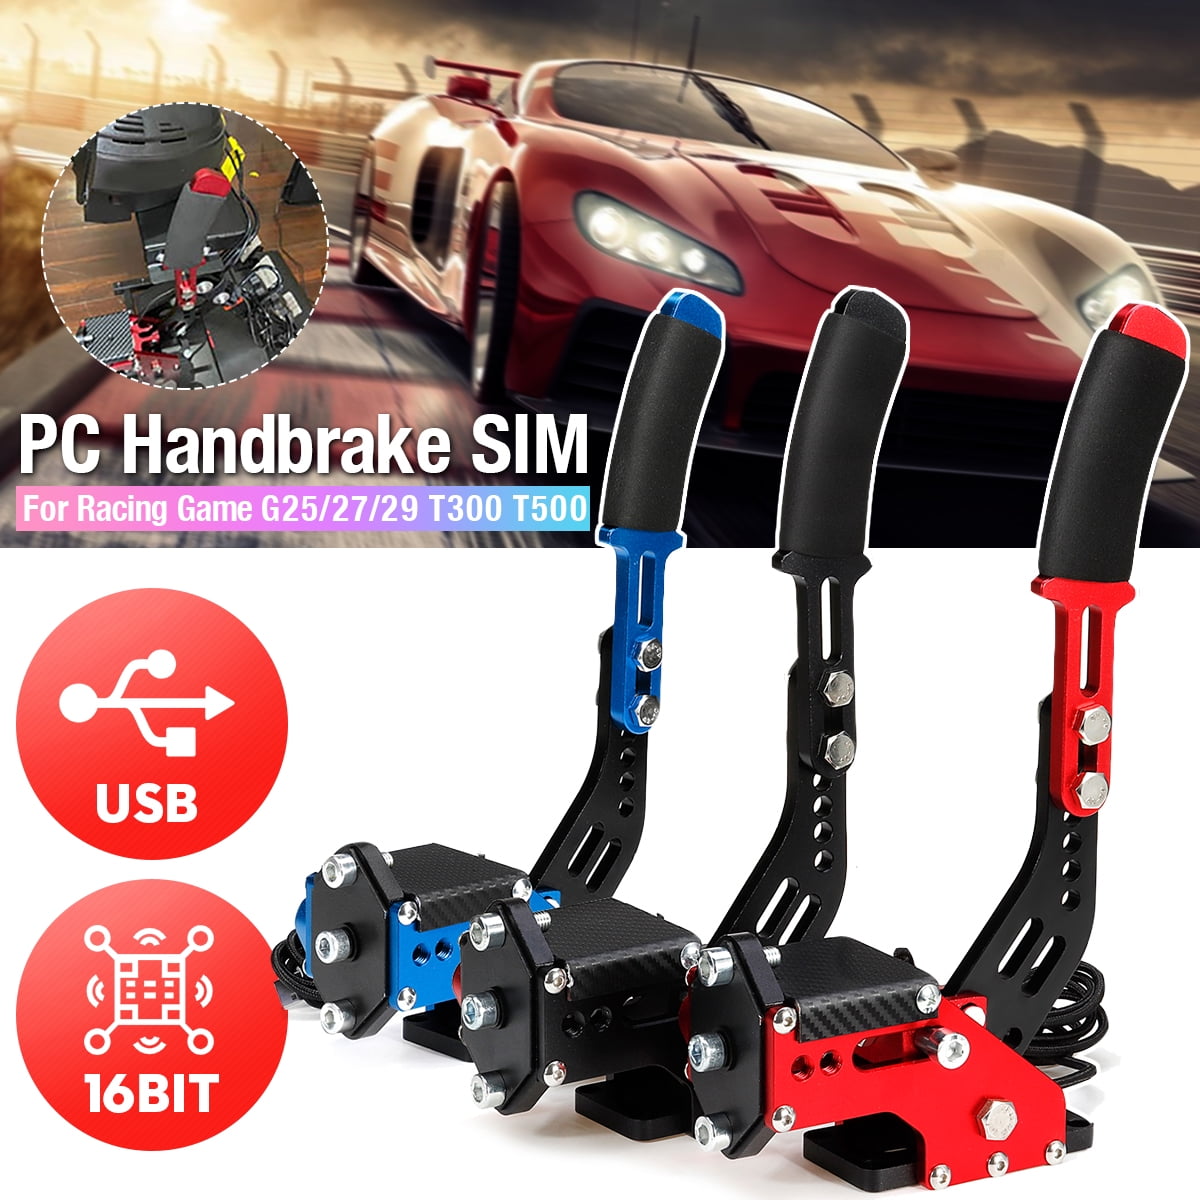 for Win System USB Handbrake for PC 27/29 14-Bit Adjustable Drift Professional Gaming Devices for Racing Games G25 